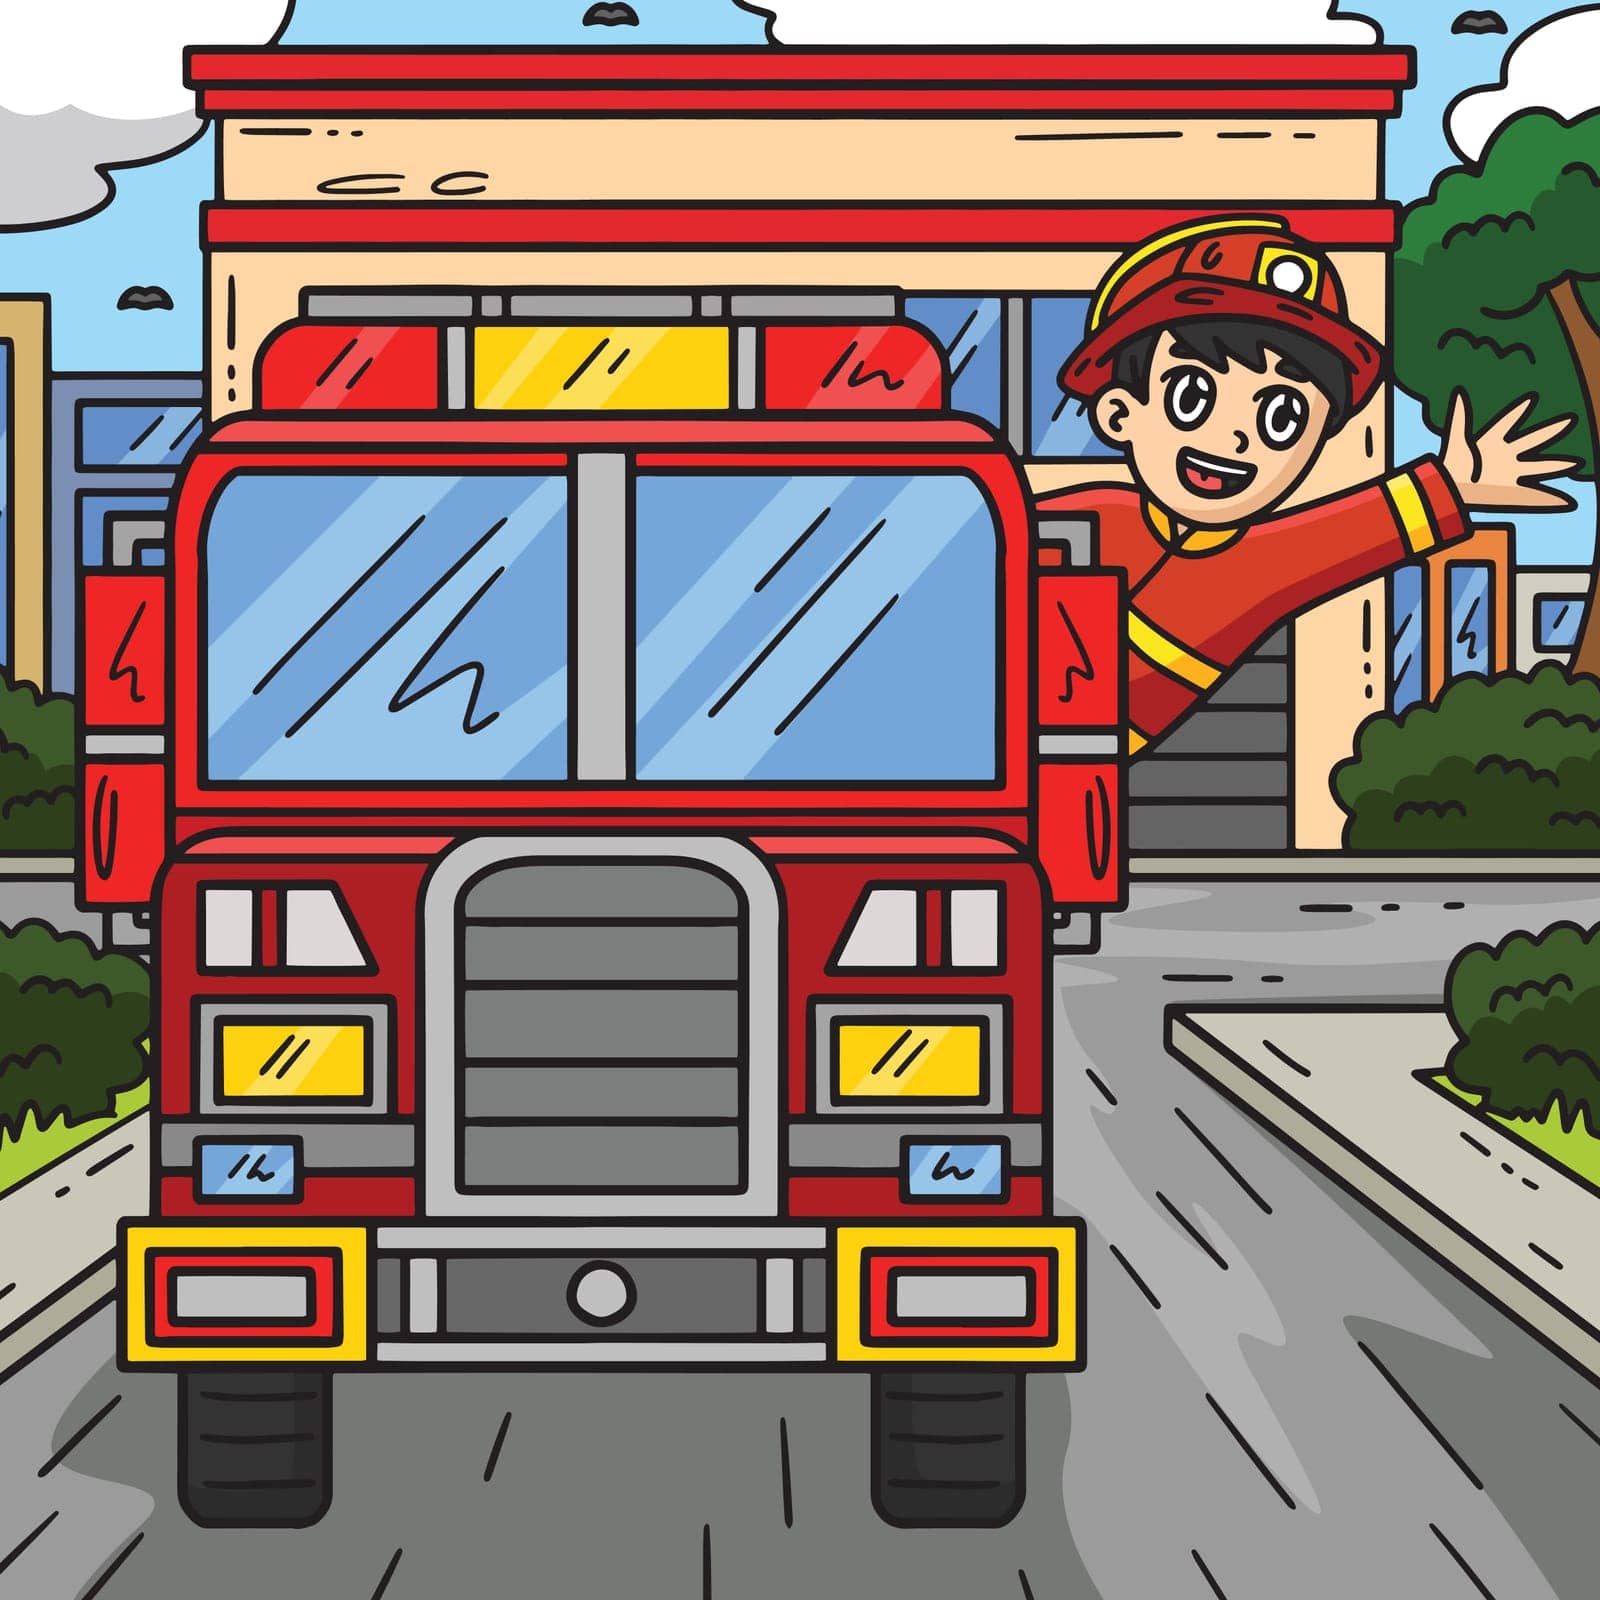 Firefighter Waving from Fire Truck Colored Cartoon by abbydesign